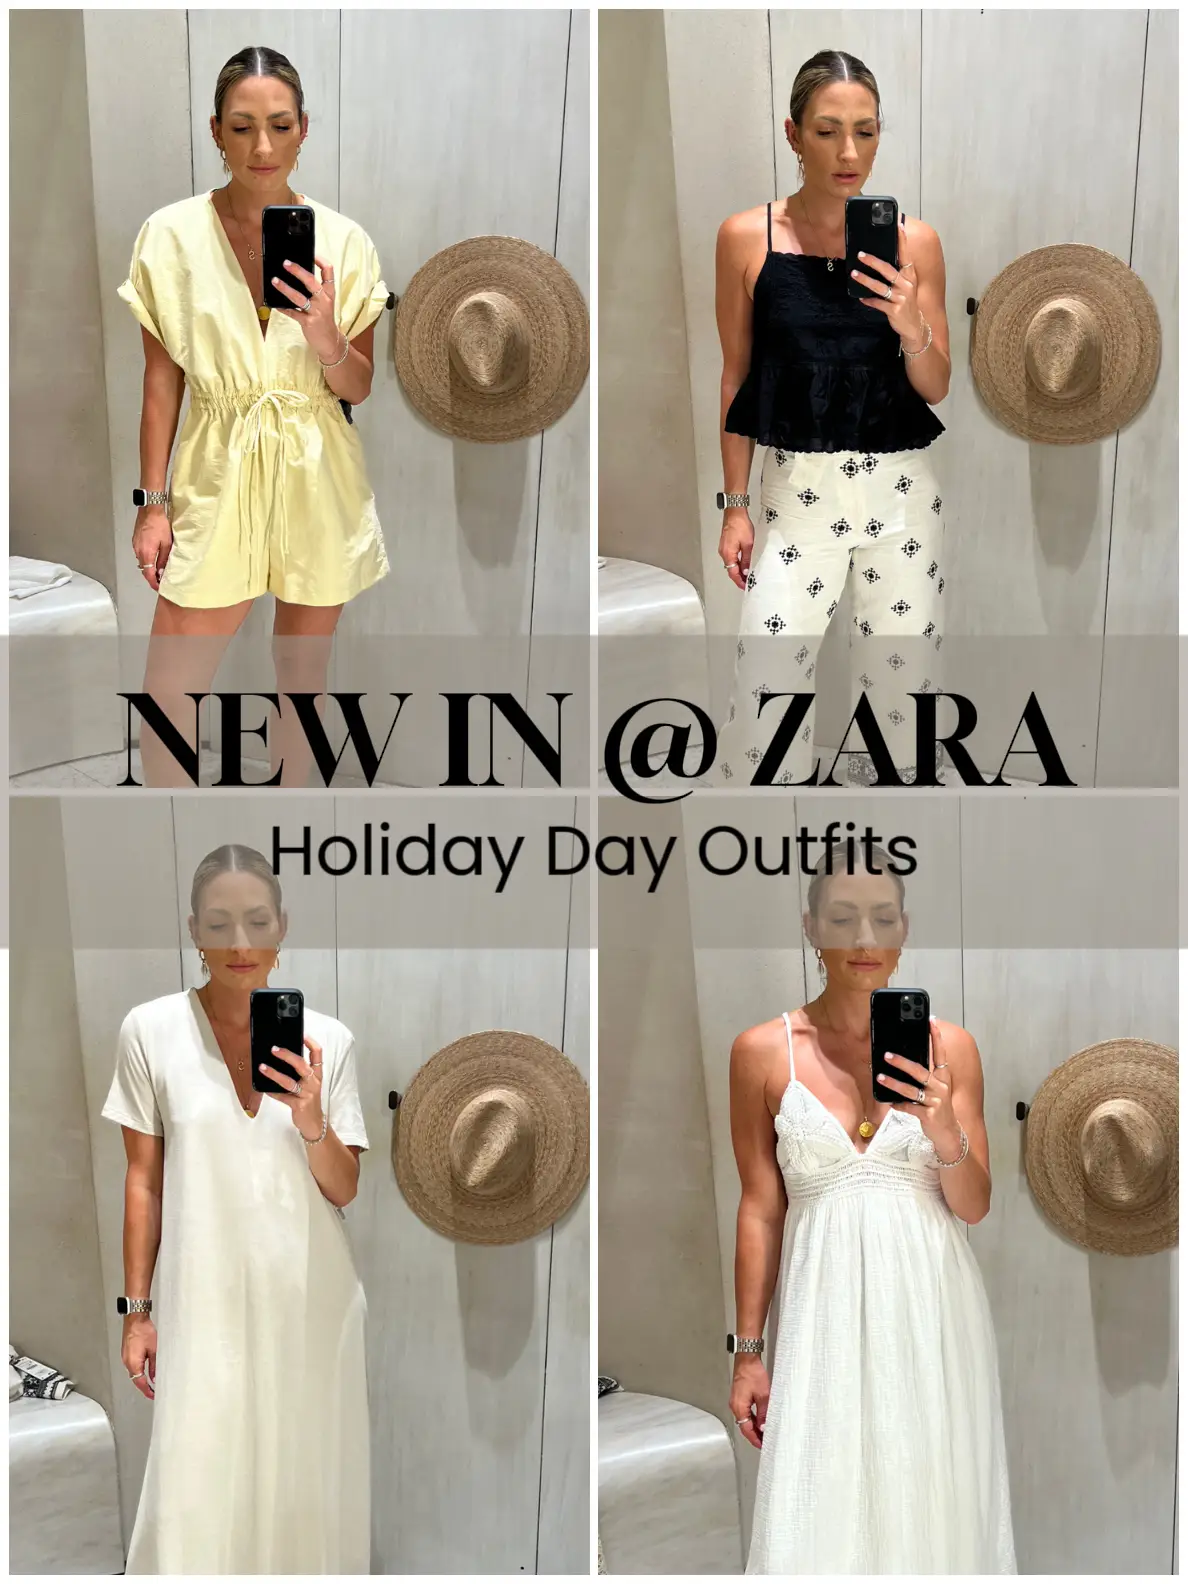 NEW IN @ ZARA : HOLIDAY DAY OUTFITS, Gallery posted by Shannongrace